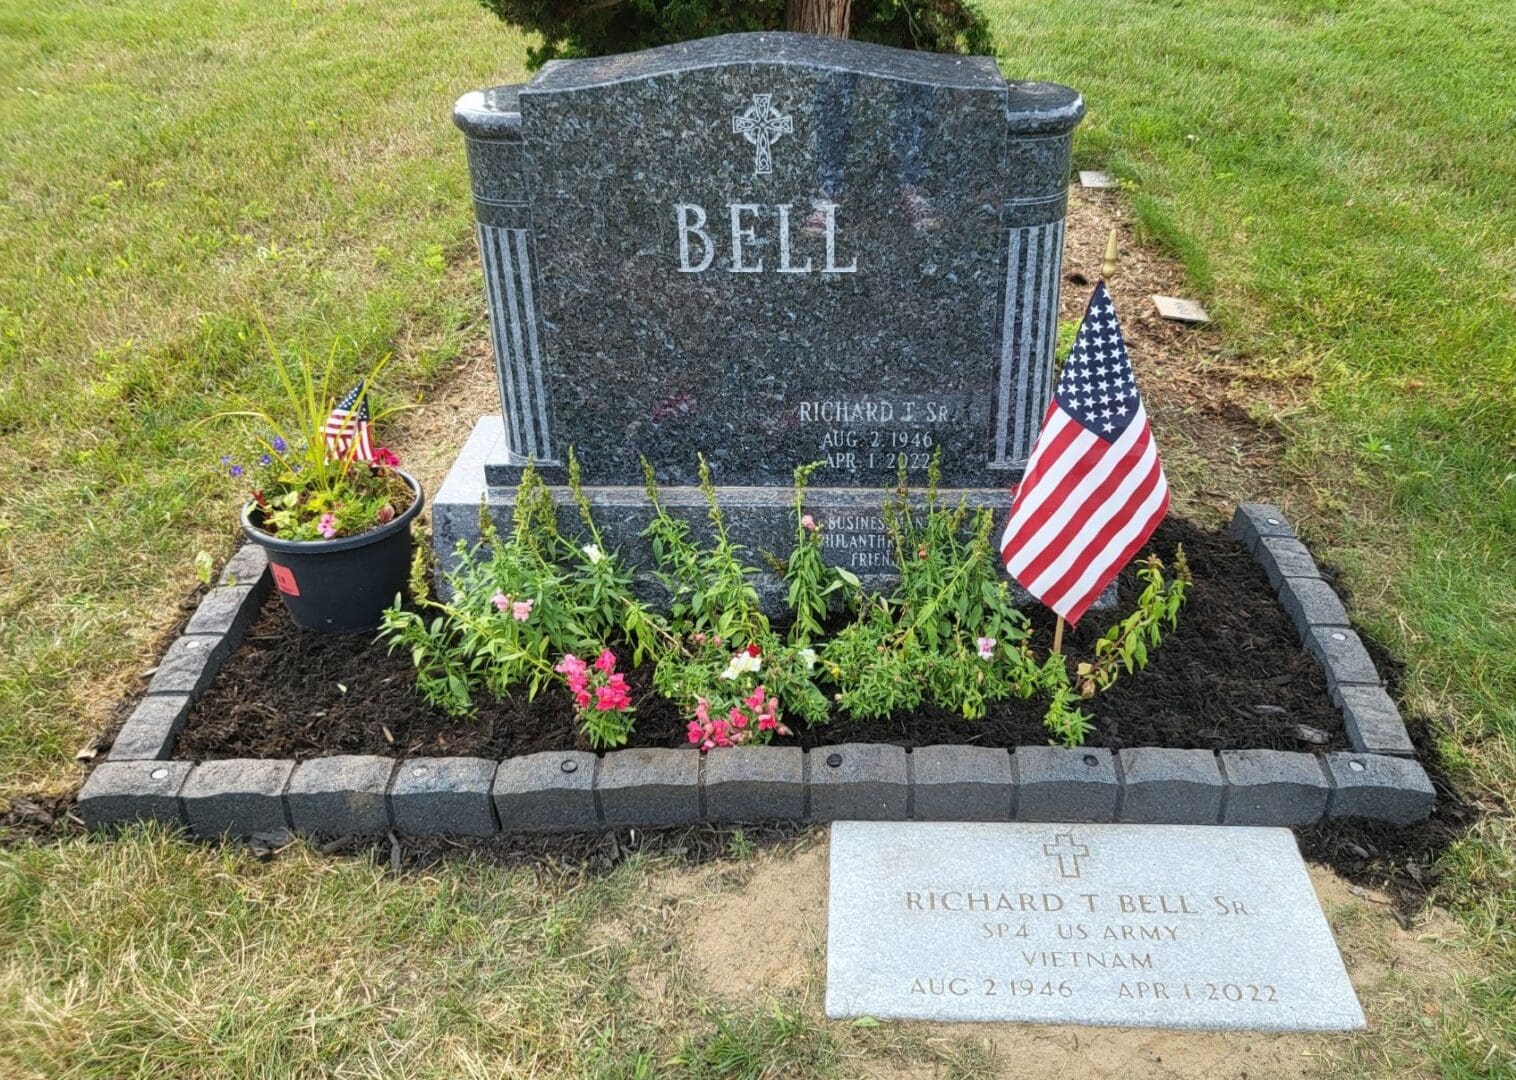 A grave with flowers and a flag in it.